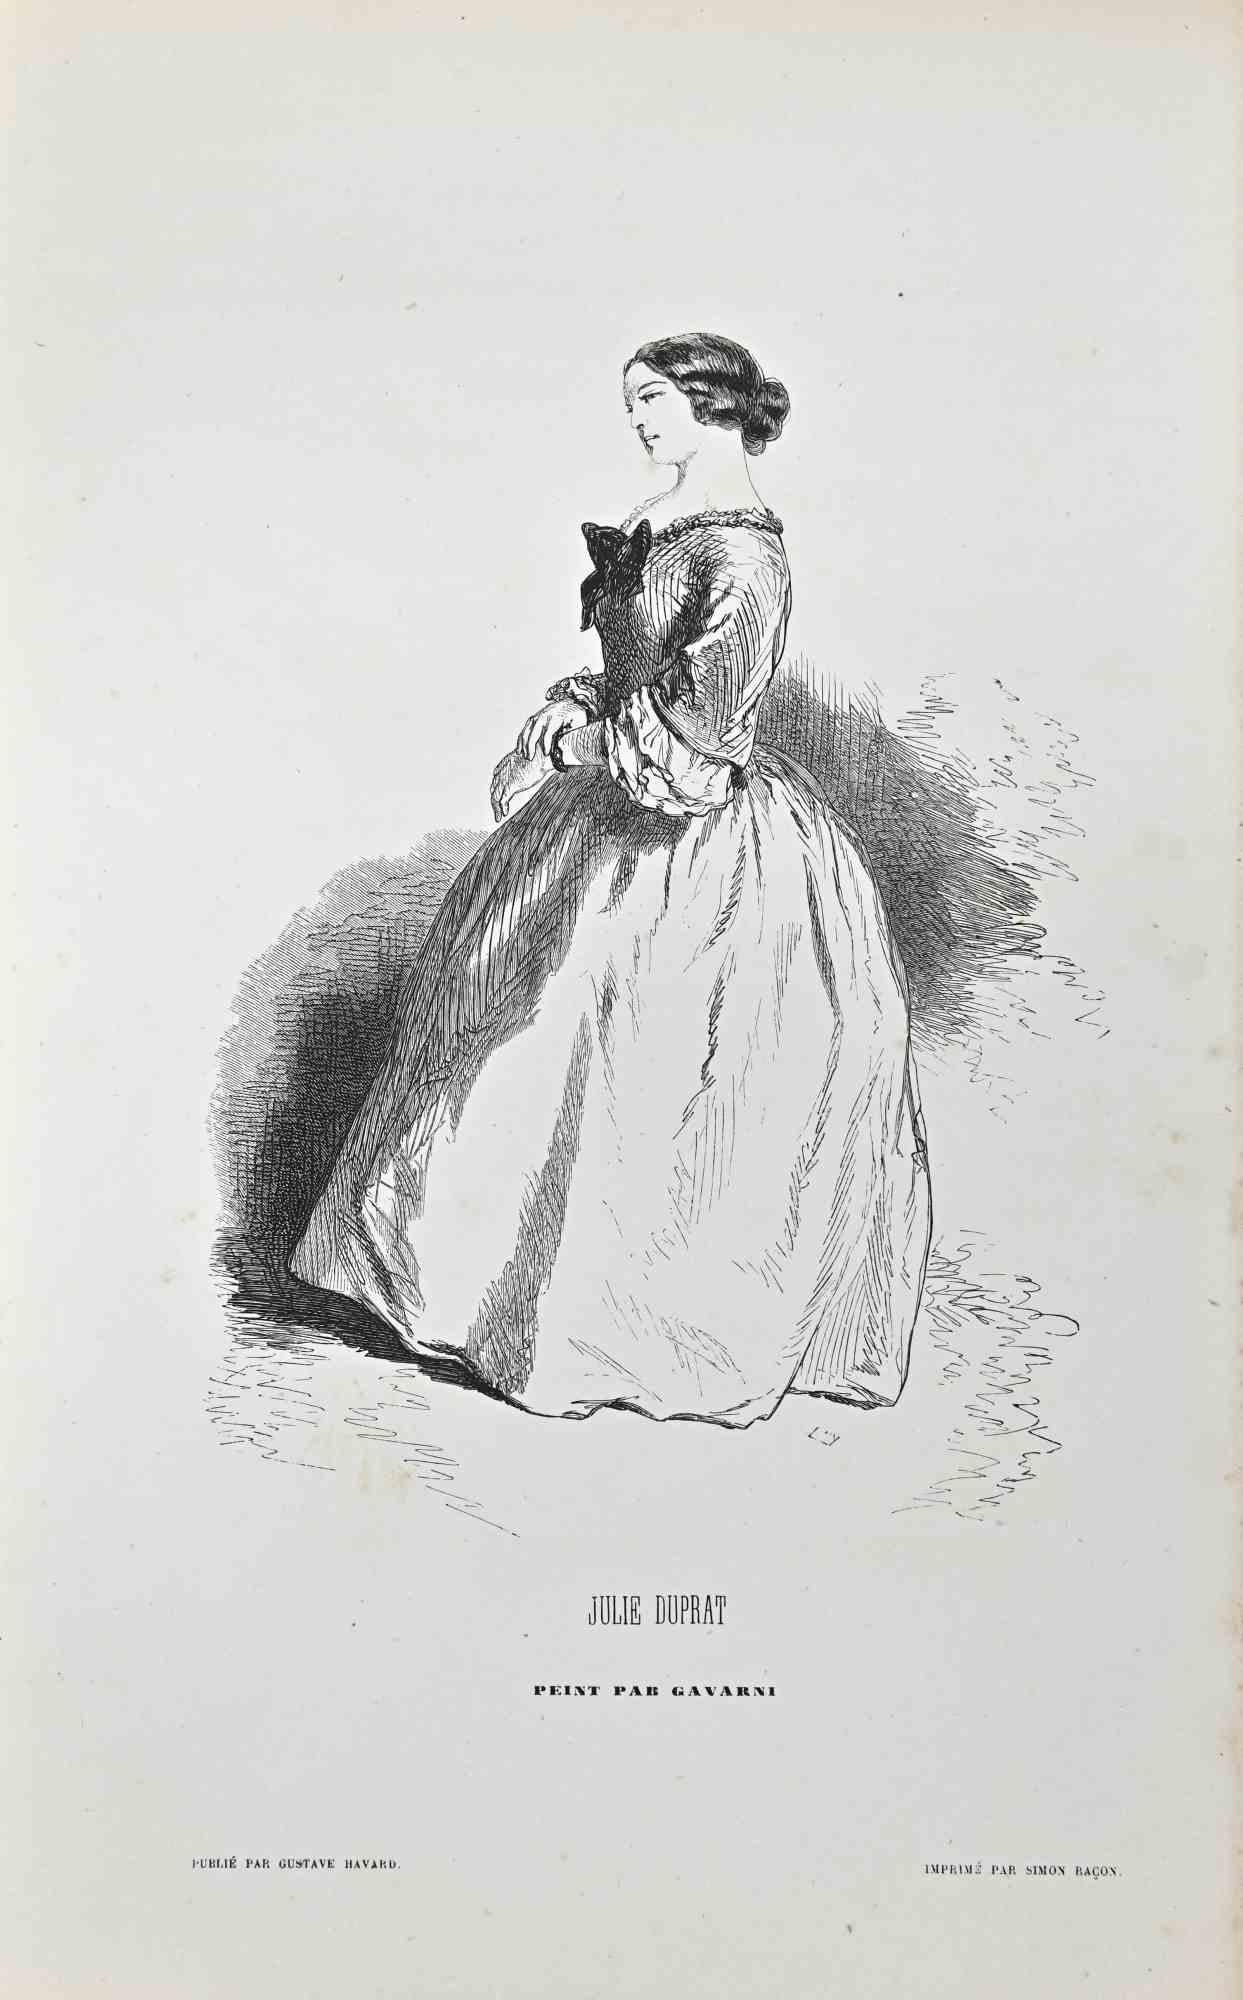 Juliie Duprat is a lithograph on ivory-colored paper, realized by the French draftsman Paul Gavarni (alias Guillaume Sulpice Chevalier Gavarni, 1804-1866) in the mid-19th Century.

Signed on the plate" Par Gavarni".

From series of "Masques et